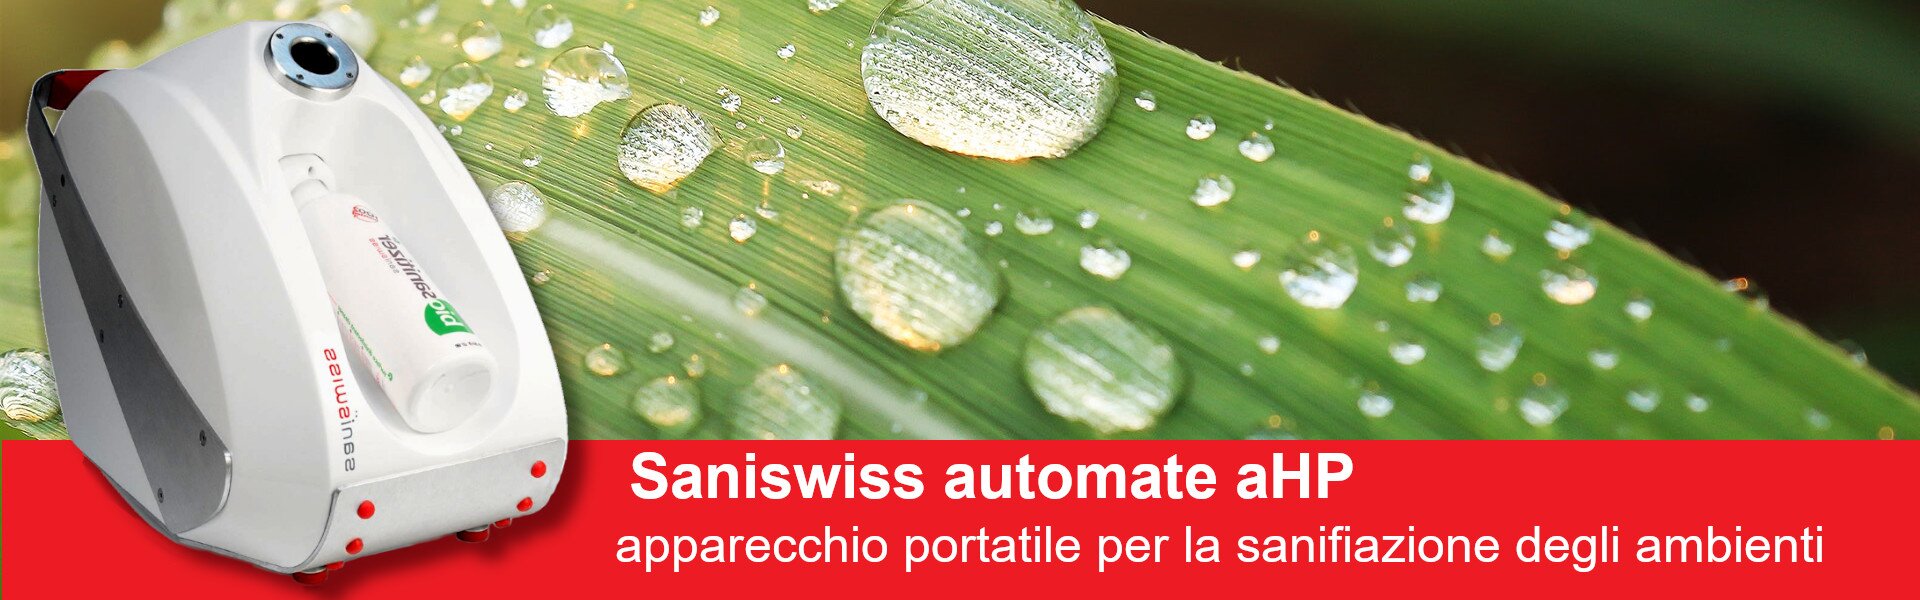 saniswiss-automate-ahp_ecologic solution